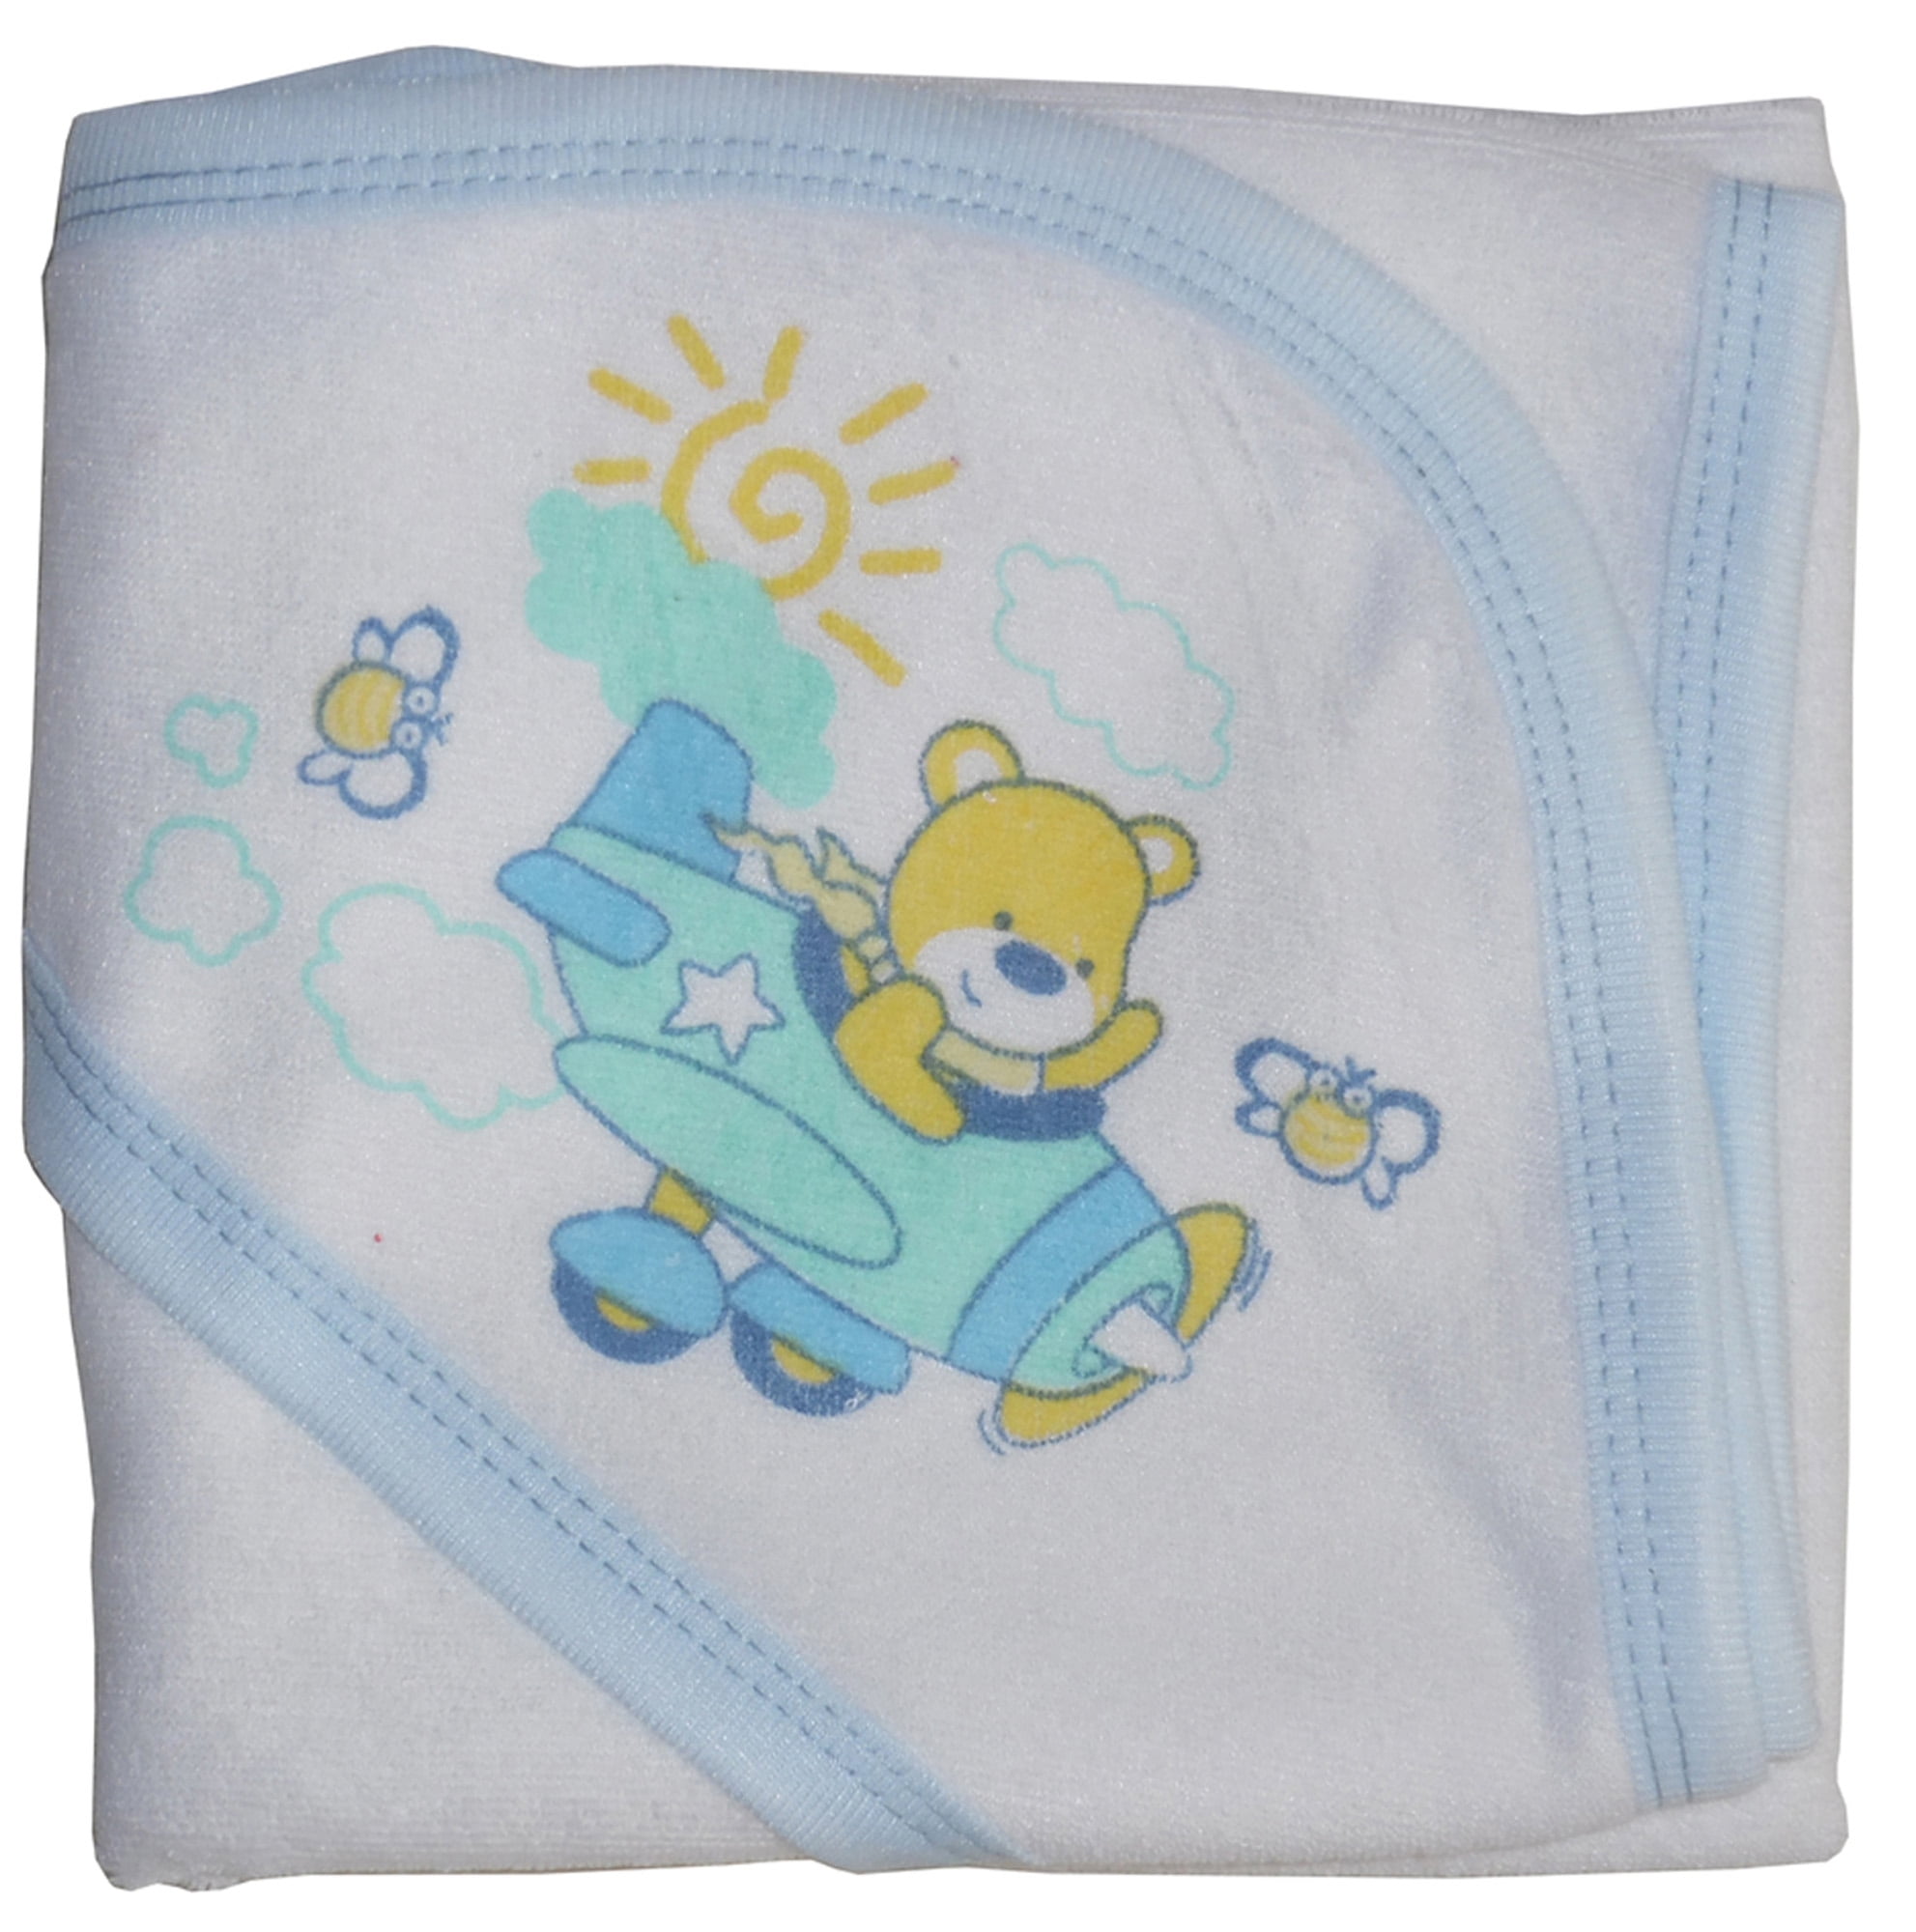 021sb Hooded Towel With Binding And Screen Prints, Blue